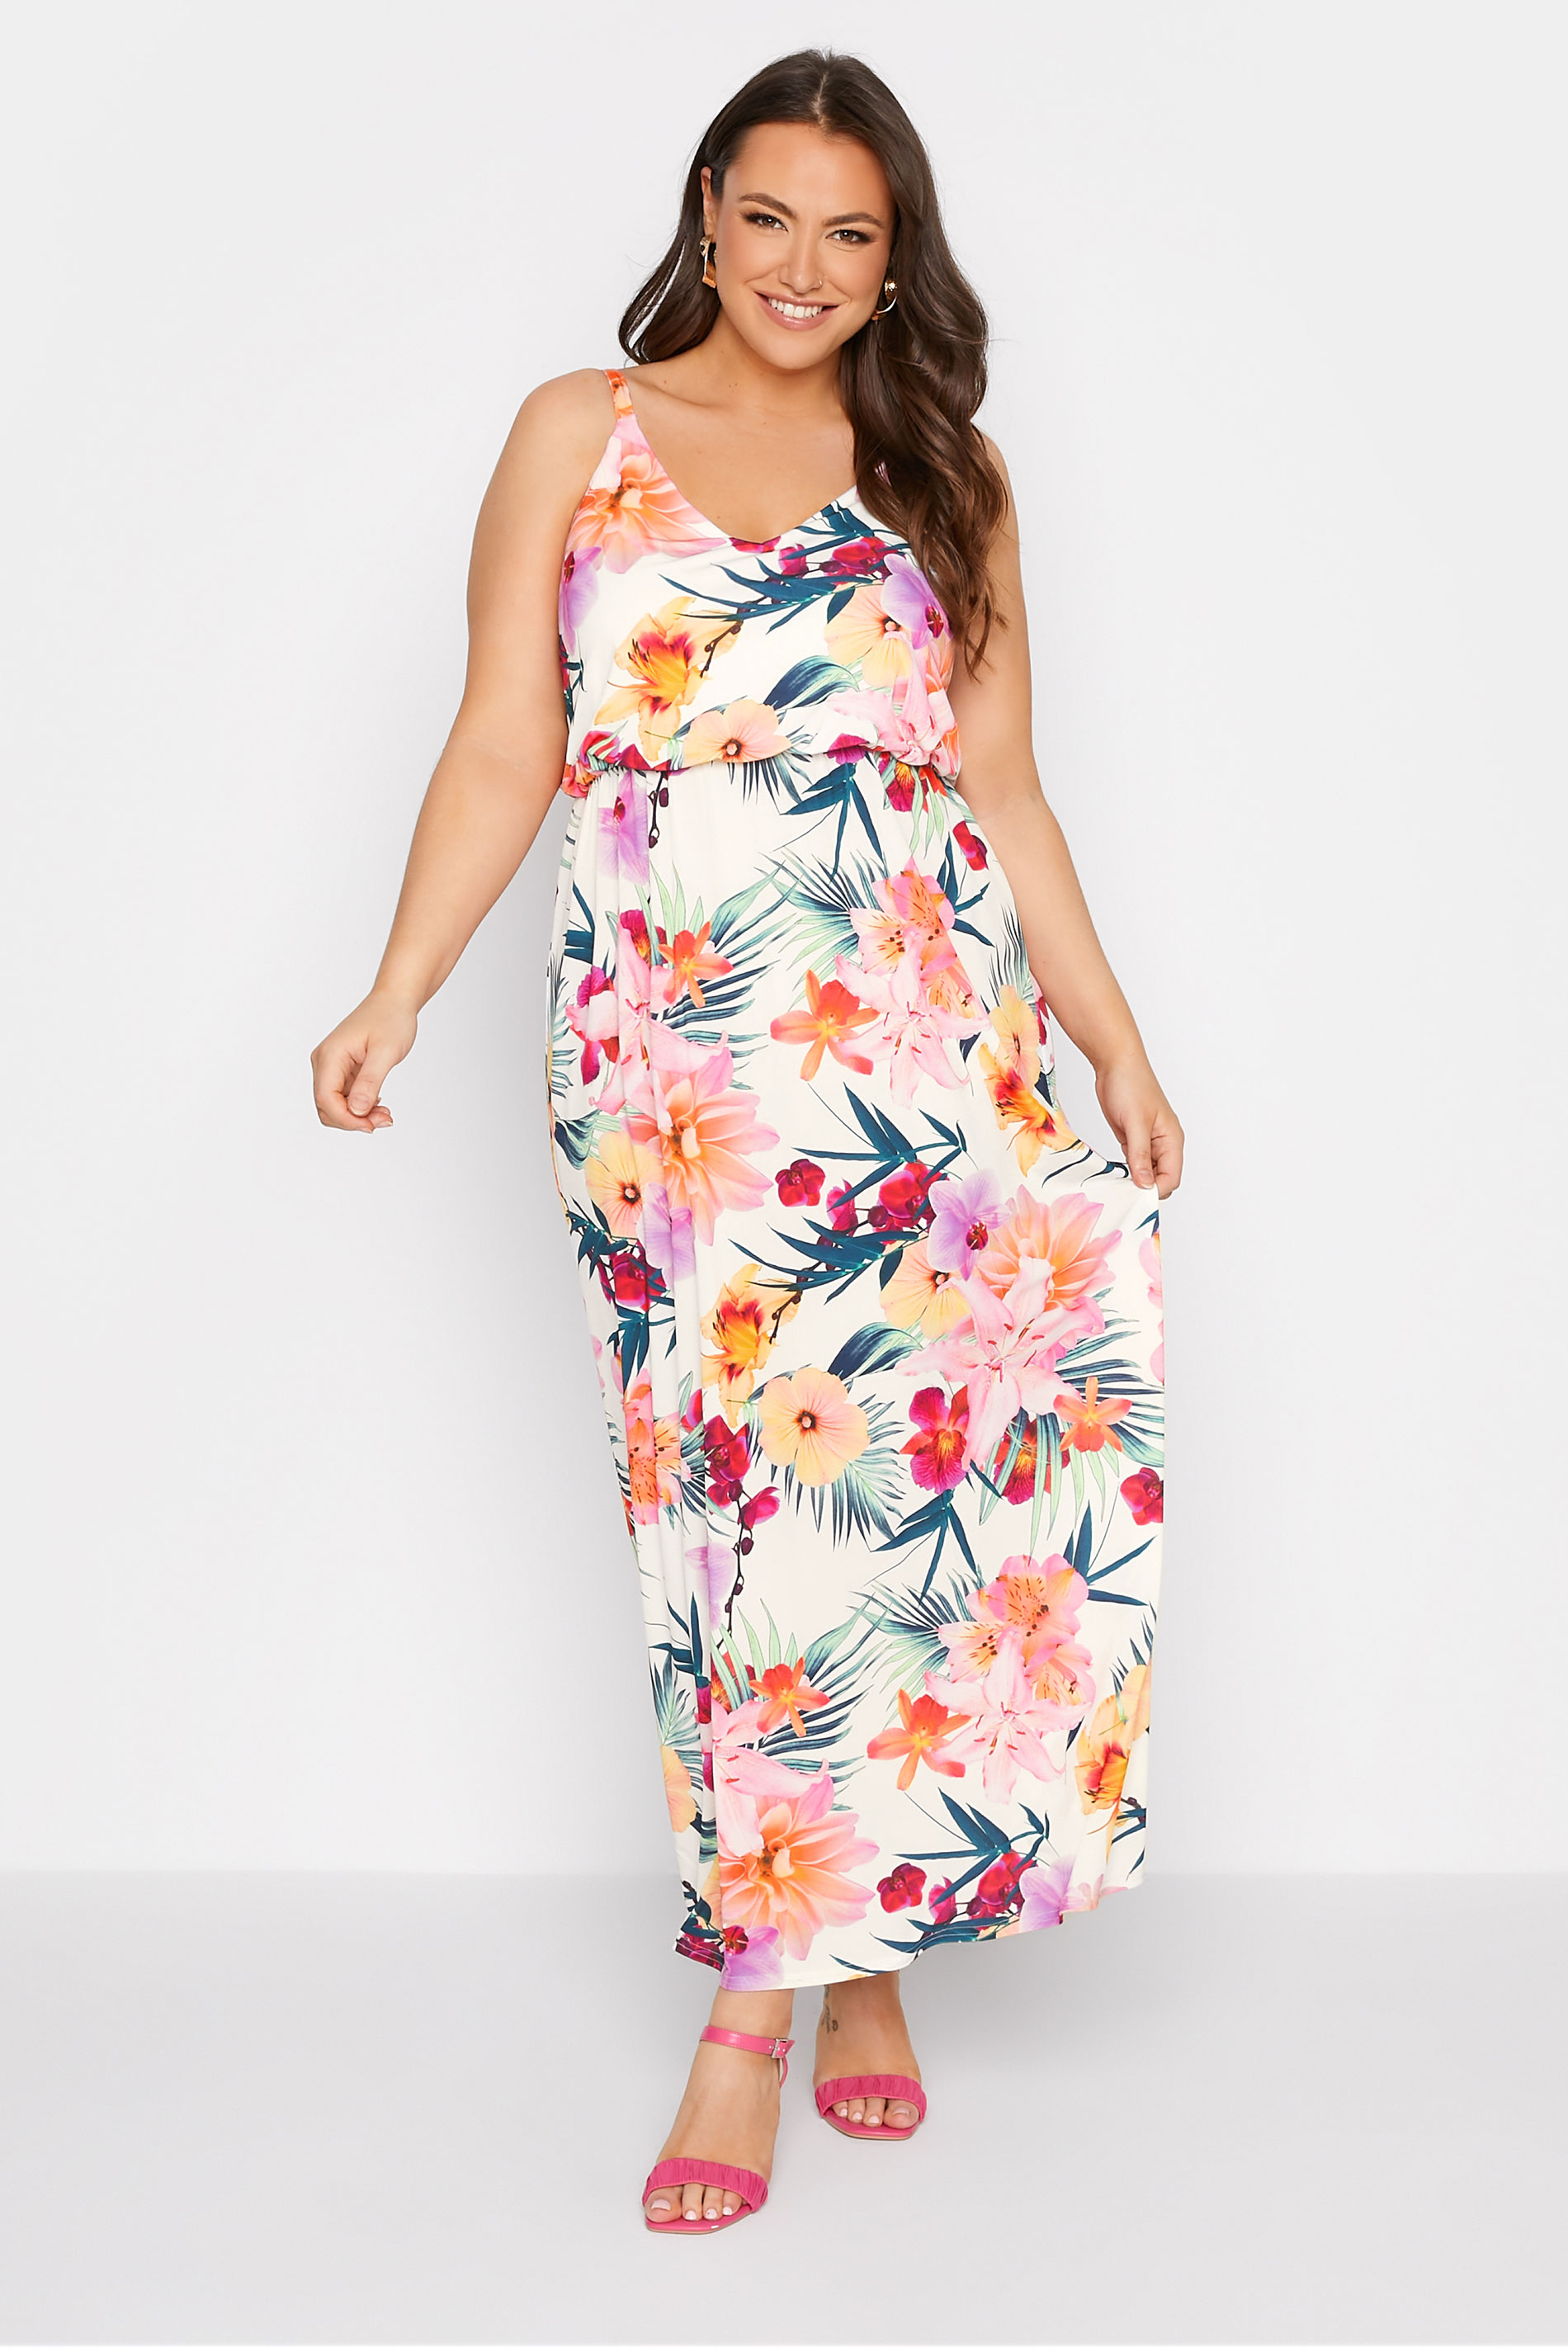 Robes Grande Taille Grande taille  Robes Longues | YOURS LONDON - Robe Blanche Imprimé Floral Tropical - JU66390